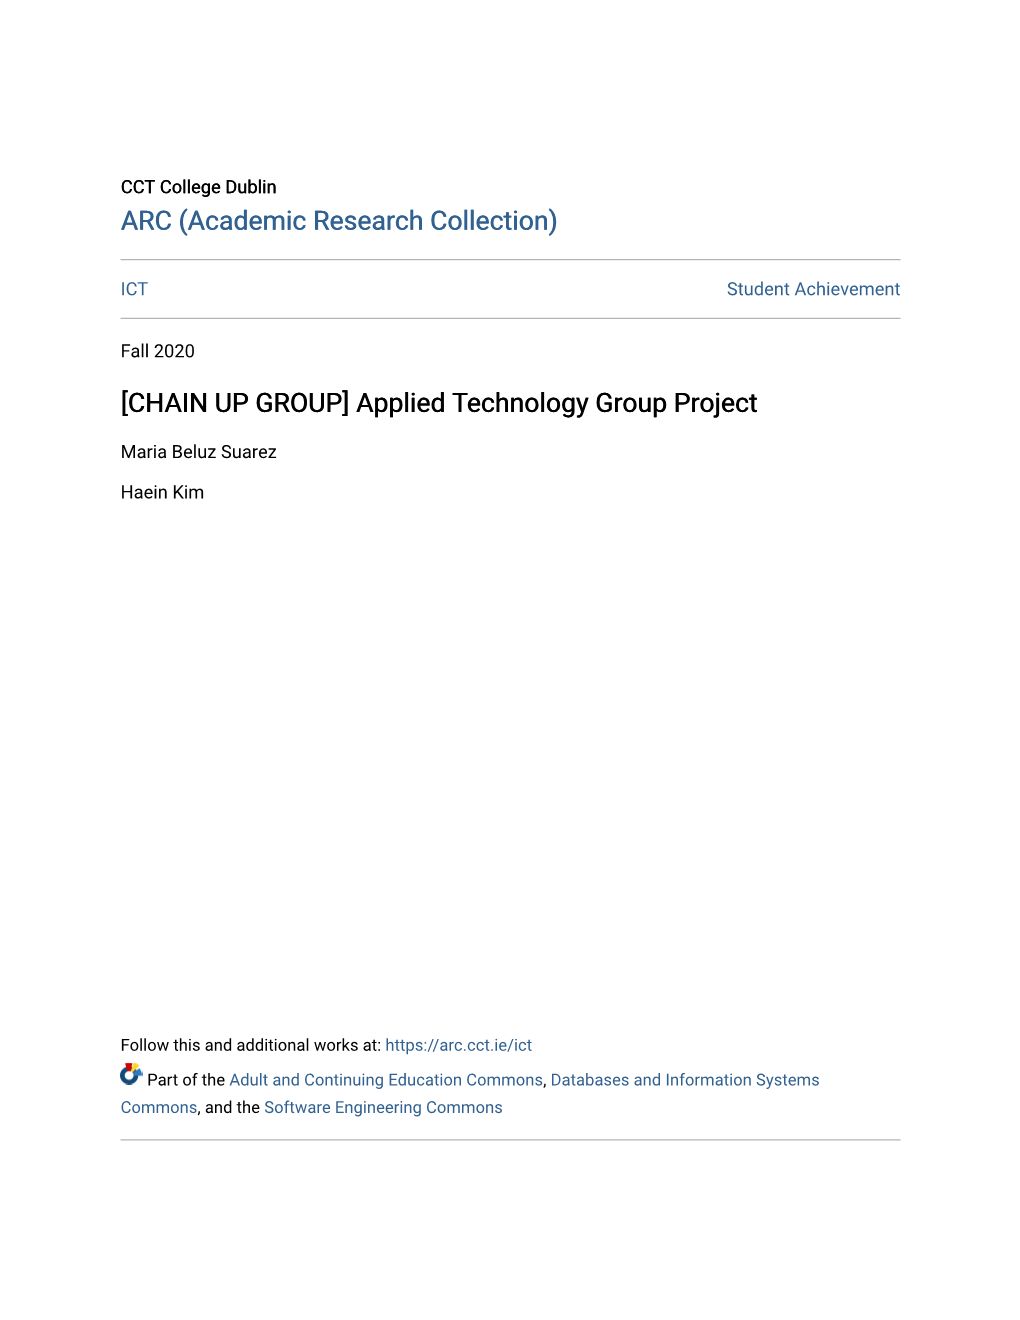 [CHAIN up GROUP] Applied Technology Group Project